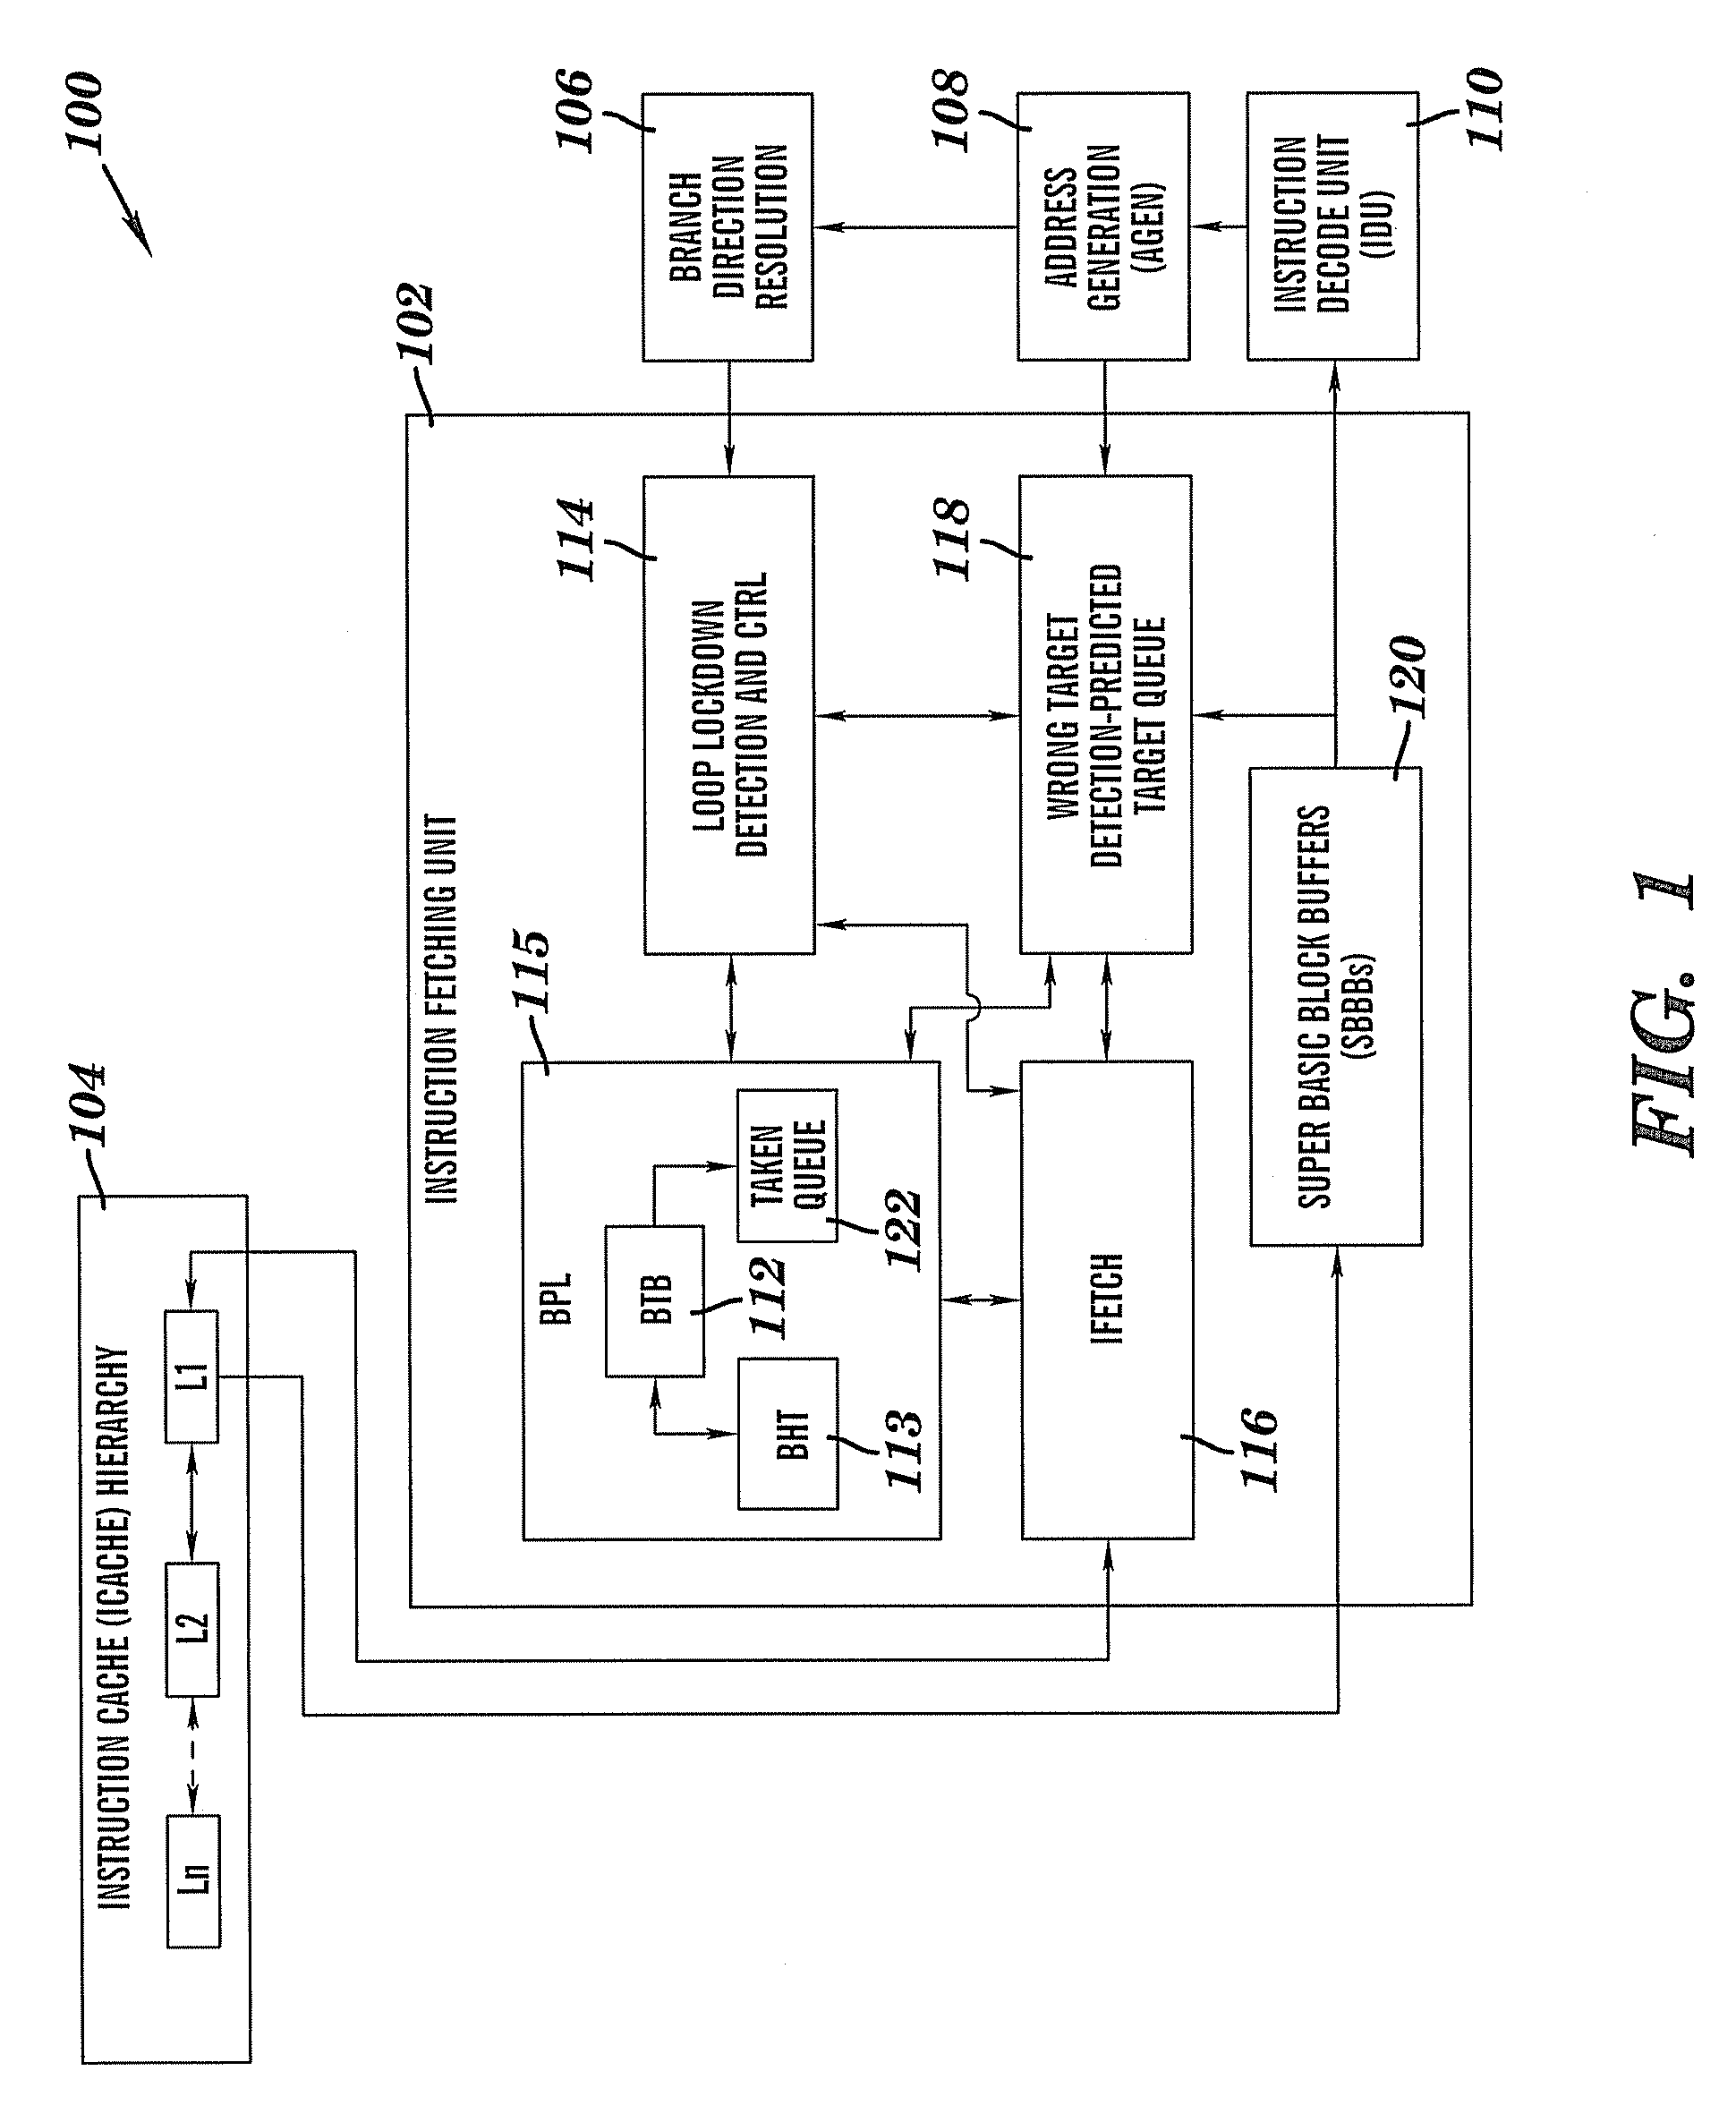 Method, system and computer program product for minimizing branch prediction latency